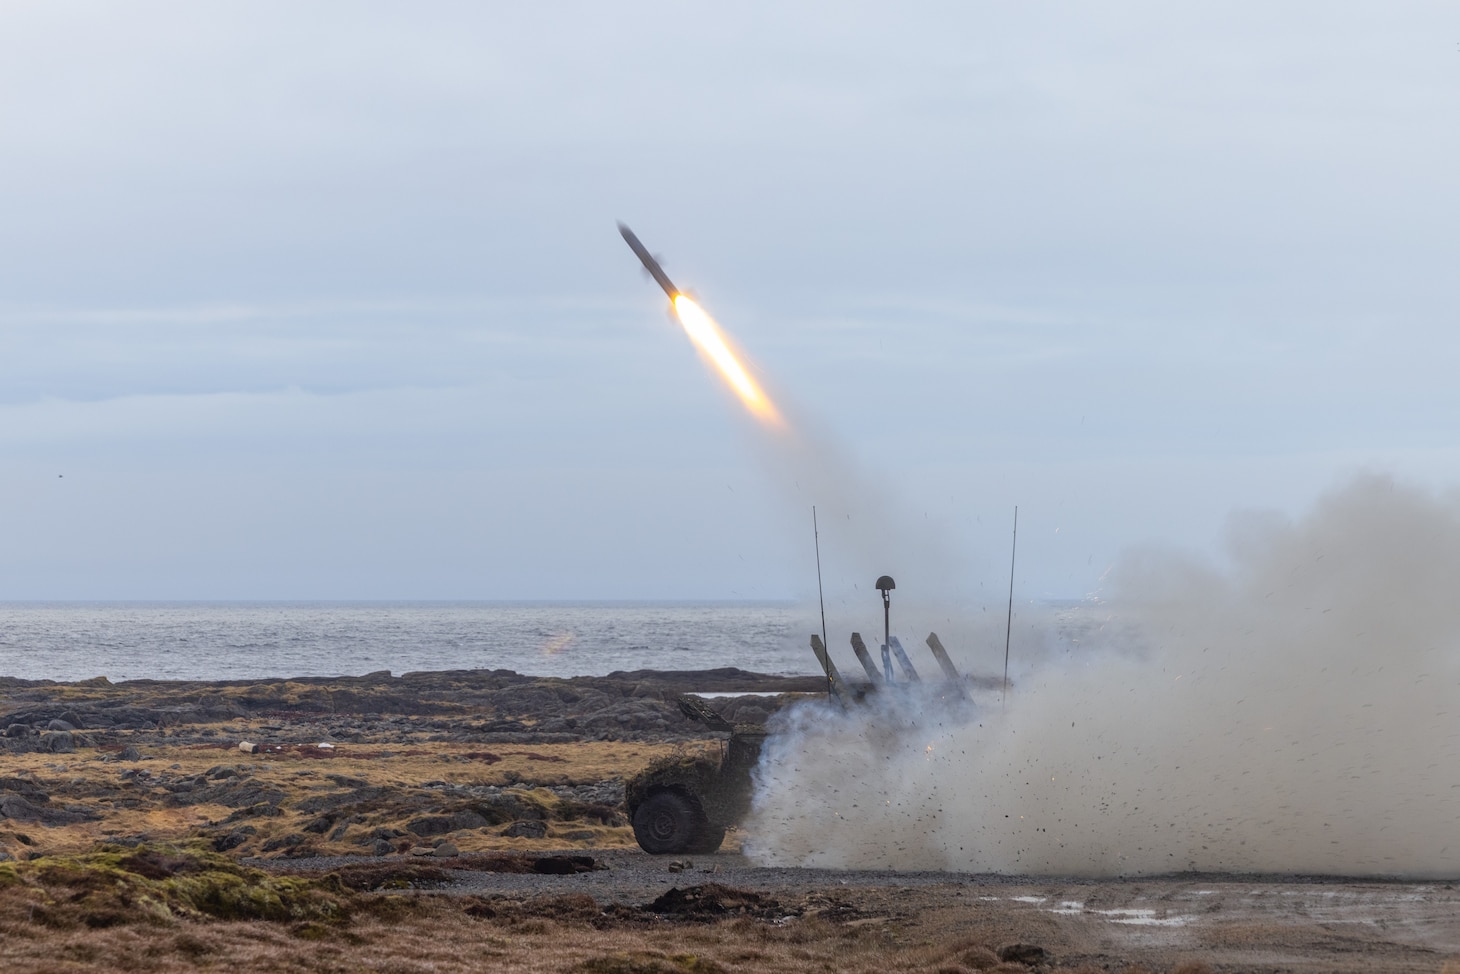 U.S. High Mobility Artillery Rocket Systems (HIMARS) and Norwegian National Advanced Surface-to-Air Missile System (NASAMS) units, worked together to counter a simulated threat at sea. They were employed as a cueing asset for targeting, providing tracks and locations of vessels to adjacent reconnaissance forces and Task Force 61/2 of potential offshore targets.